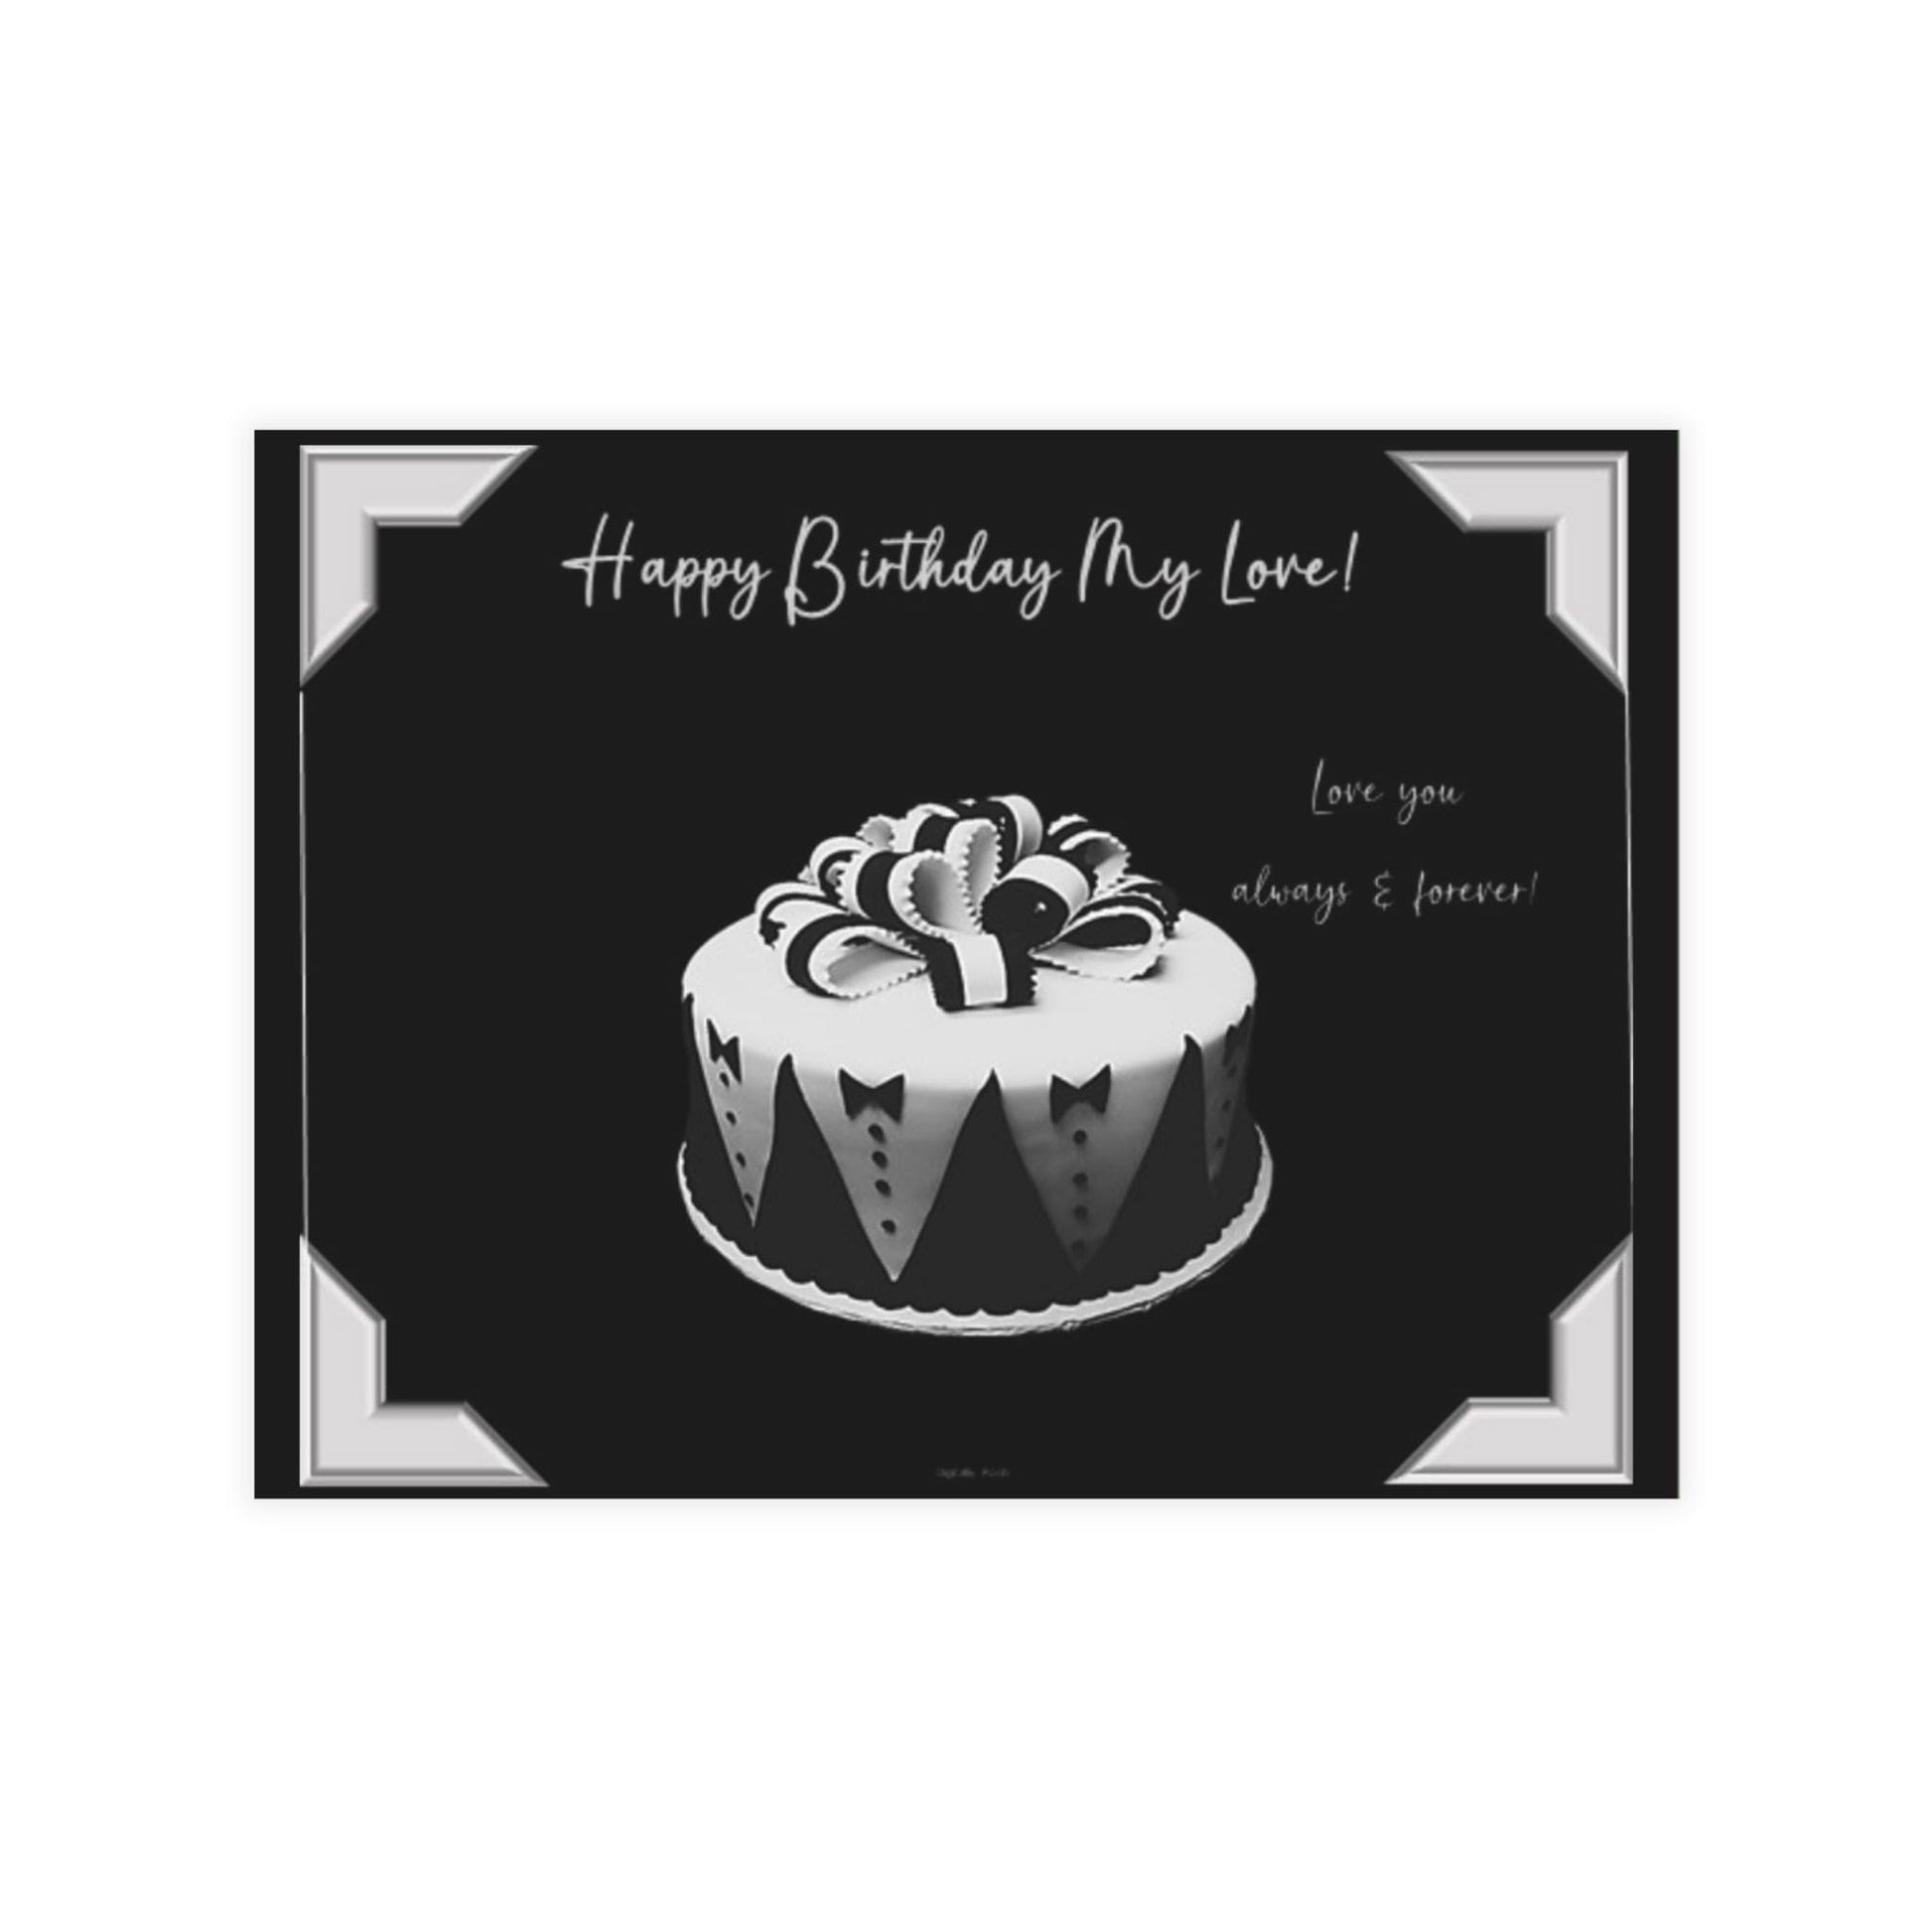 Personalized Note Card: Add a Personal Touch with Customized Stationery for Every Occasion. Cake For Him Notecard